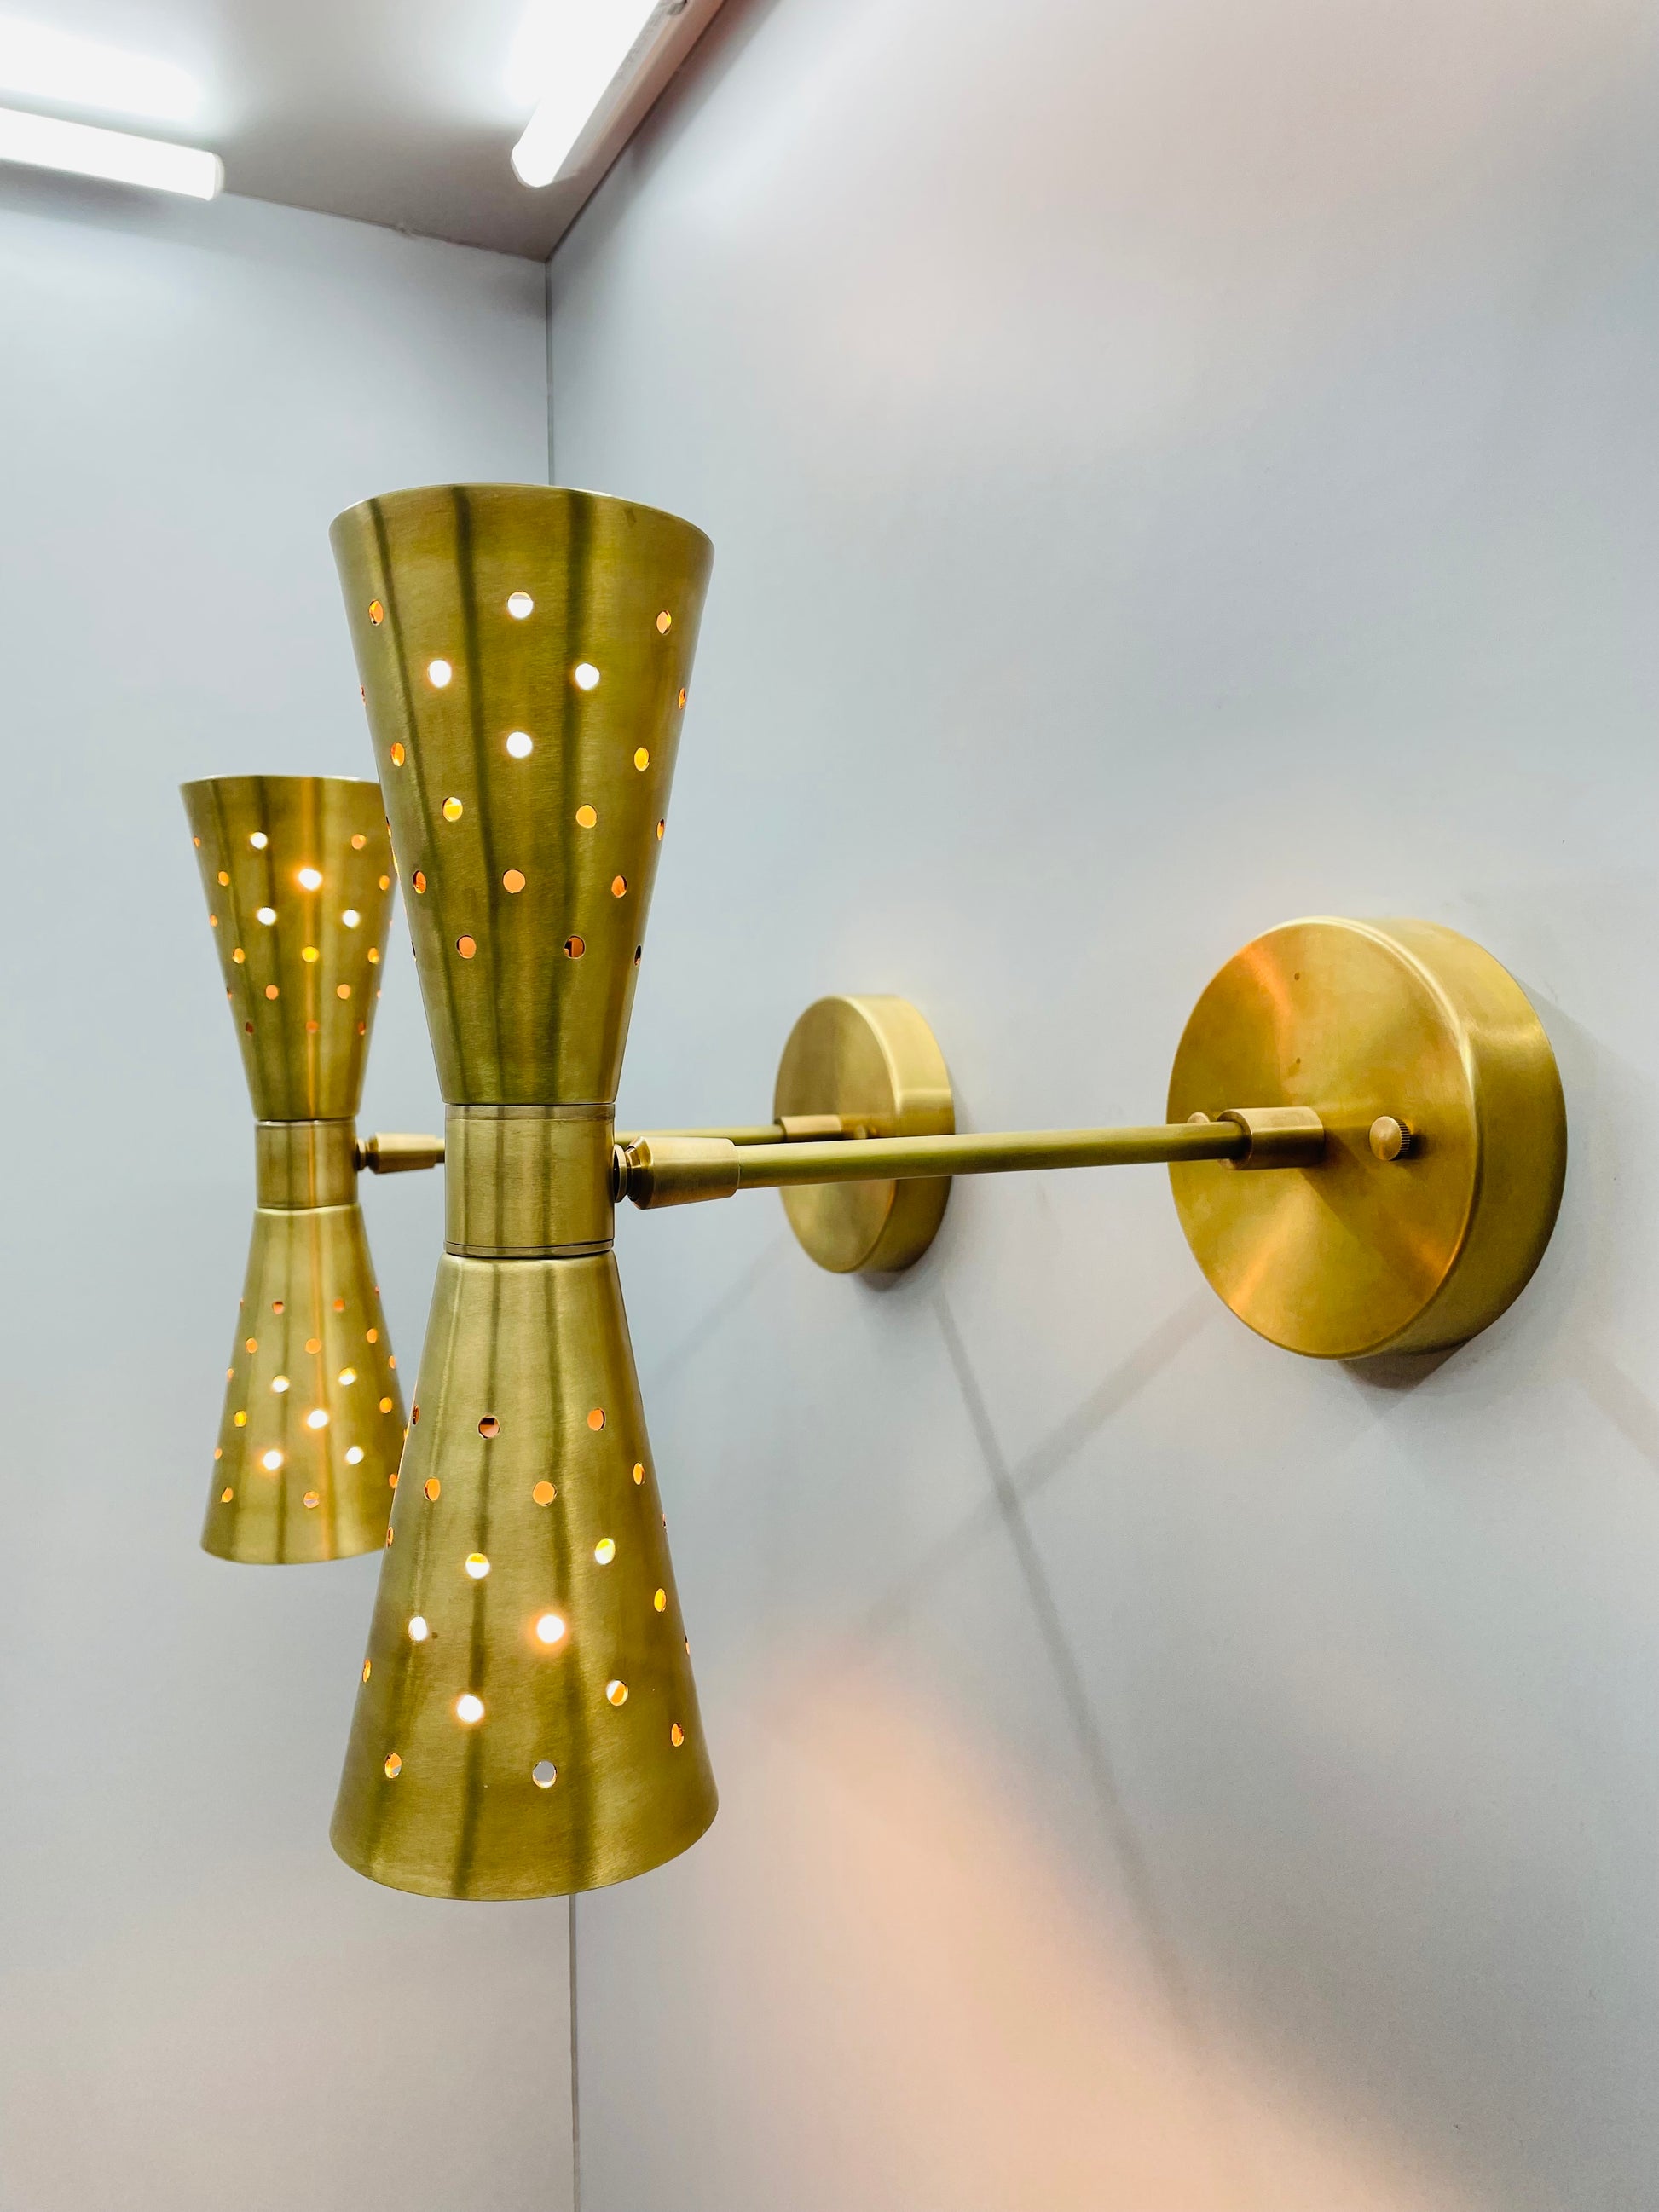 Dual Cone Wall Sconce Lamps - Iconic 50's and 60's Style